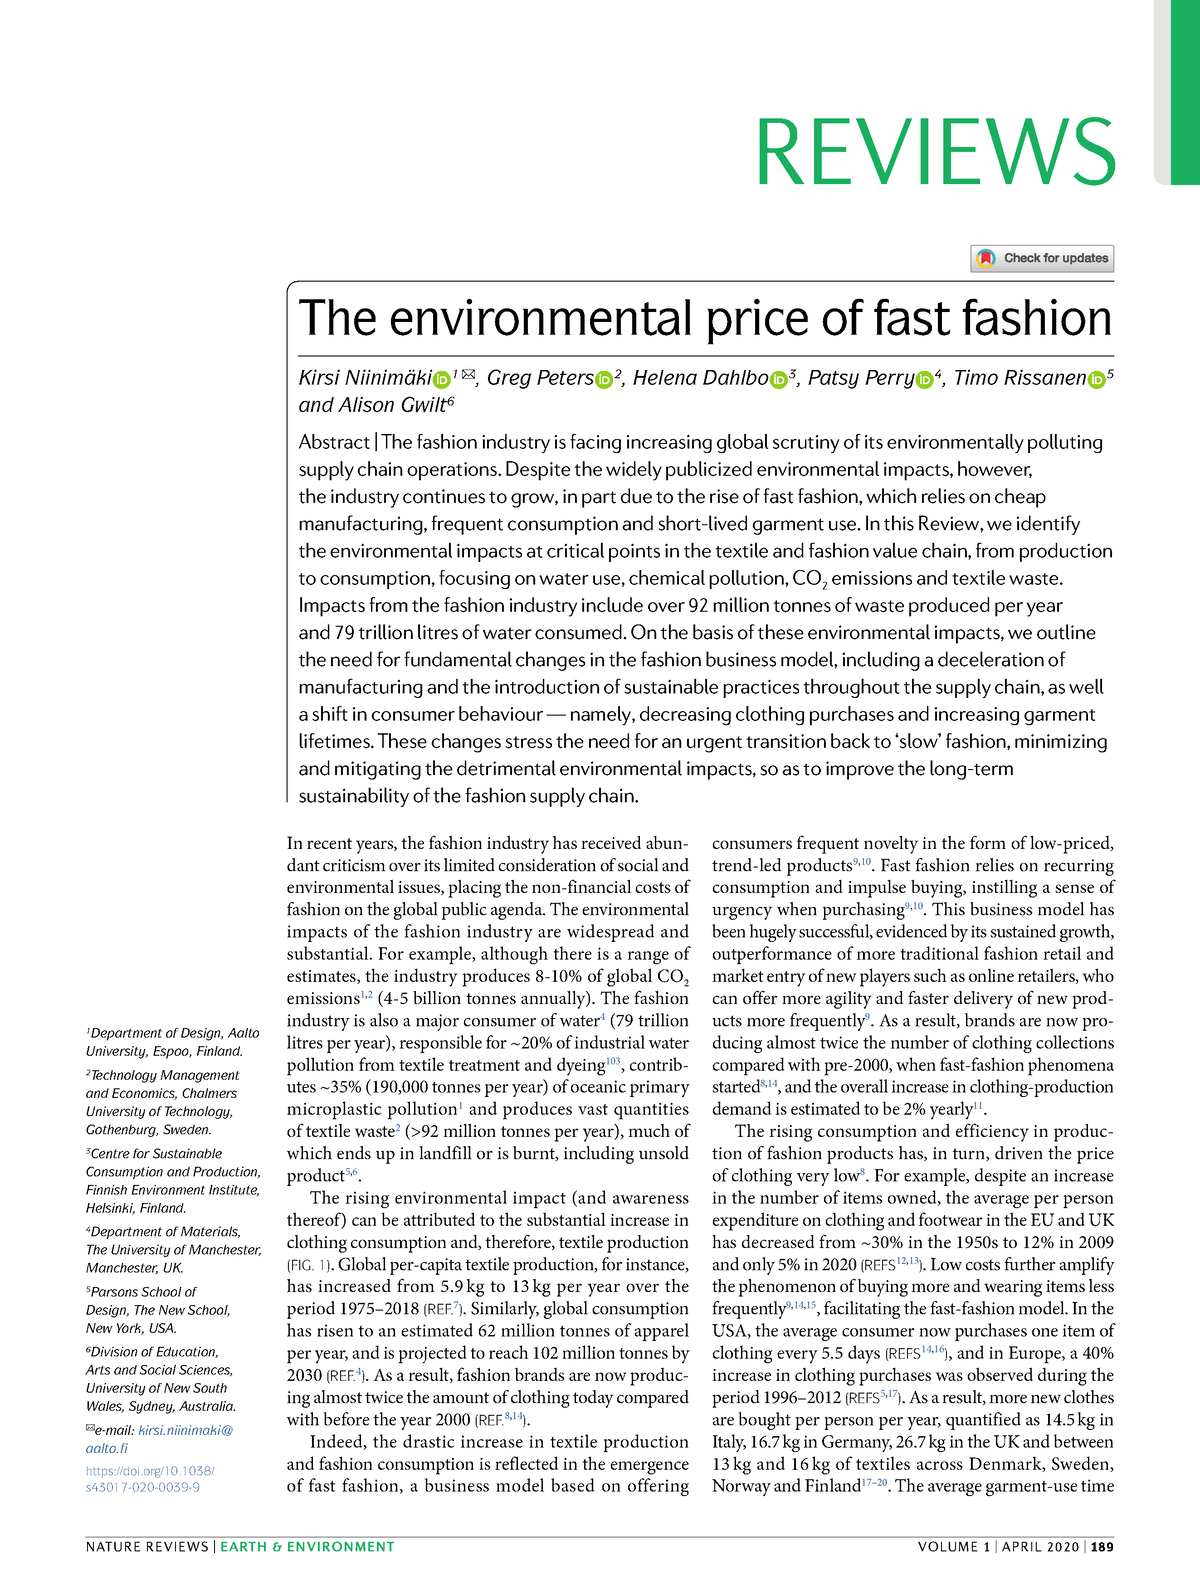 Read this before you go sales shopping: the environmental costs of